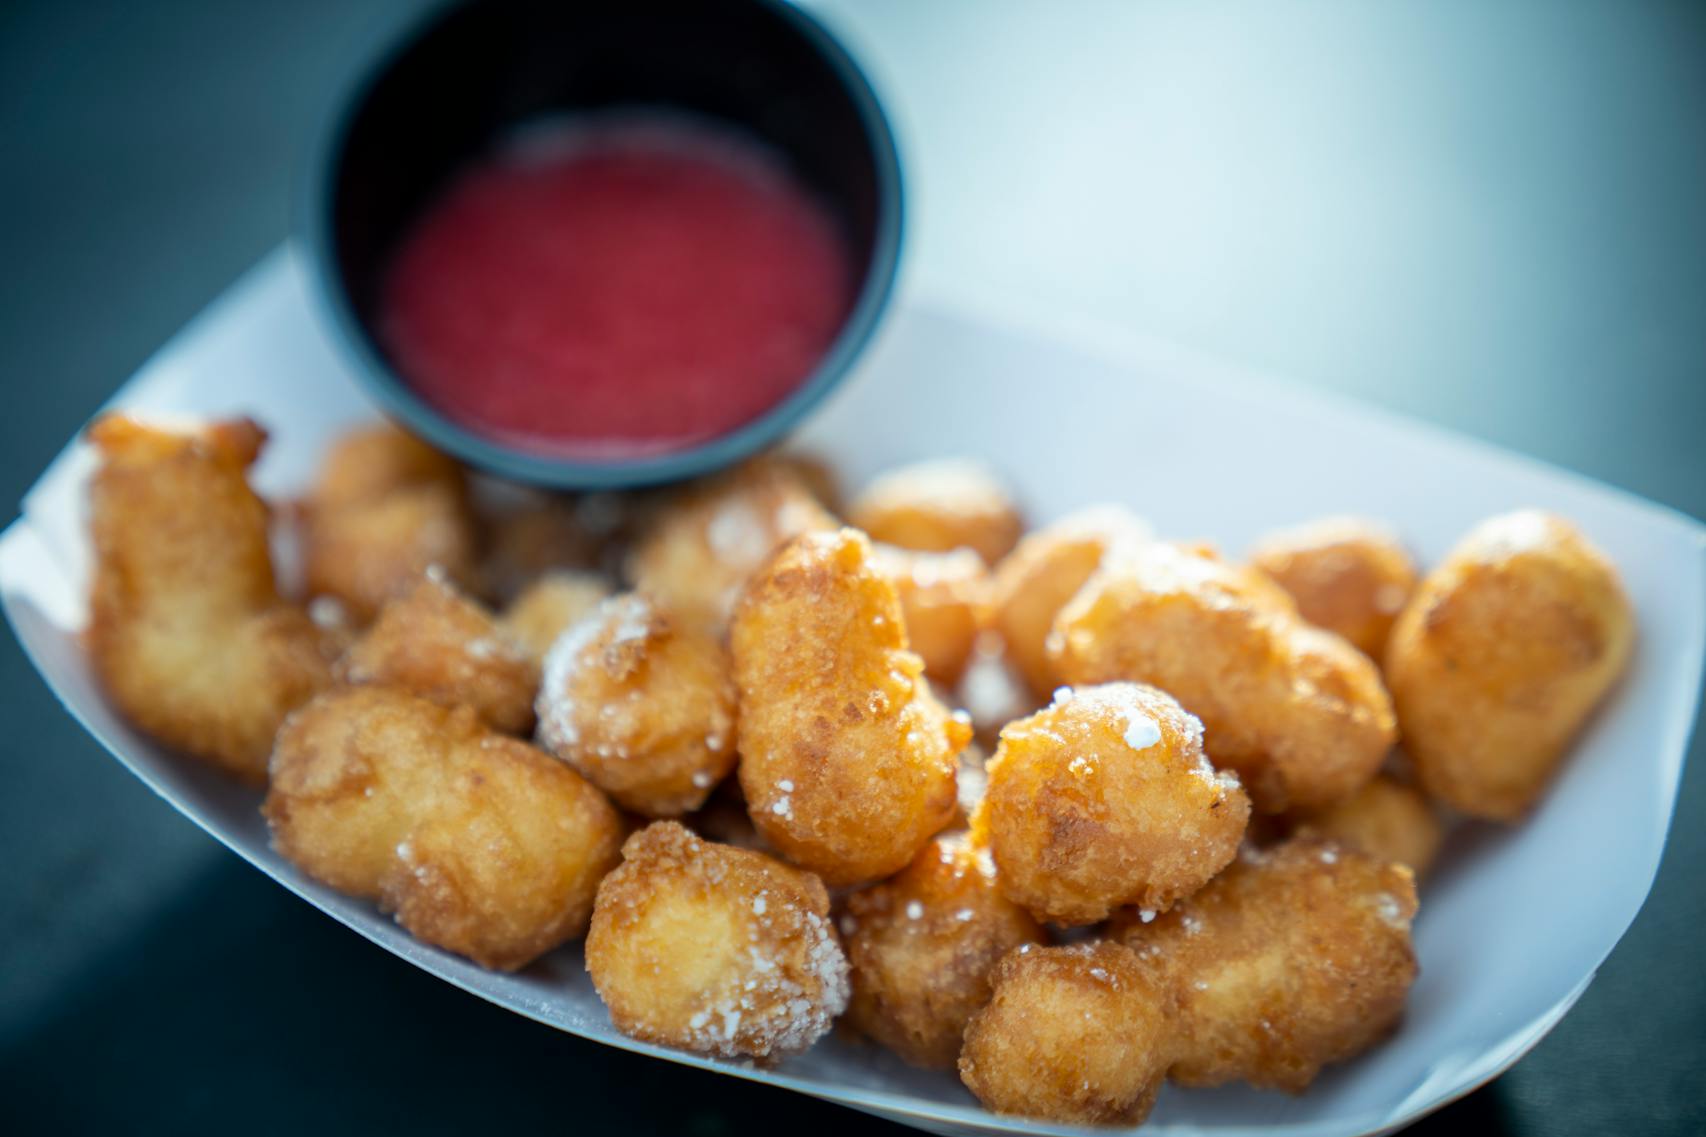 Cheesecake curds from Lulu’s Public House. The new foods of the 2023 Minnesota State Fair photographed on the first day of the fair in Falcon Heights, Minn. on Tuesday, Aug. 8, 2023. ] LEILA NAVIDI • leila.navidi@startribune.com